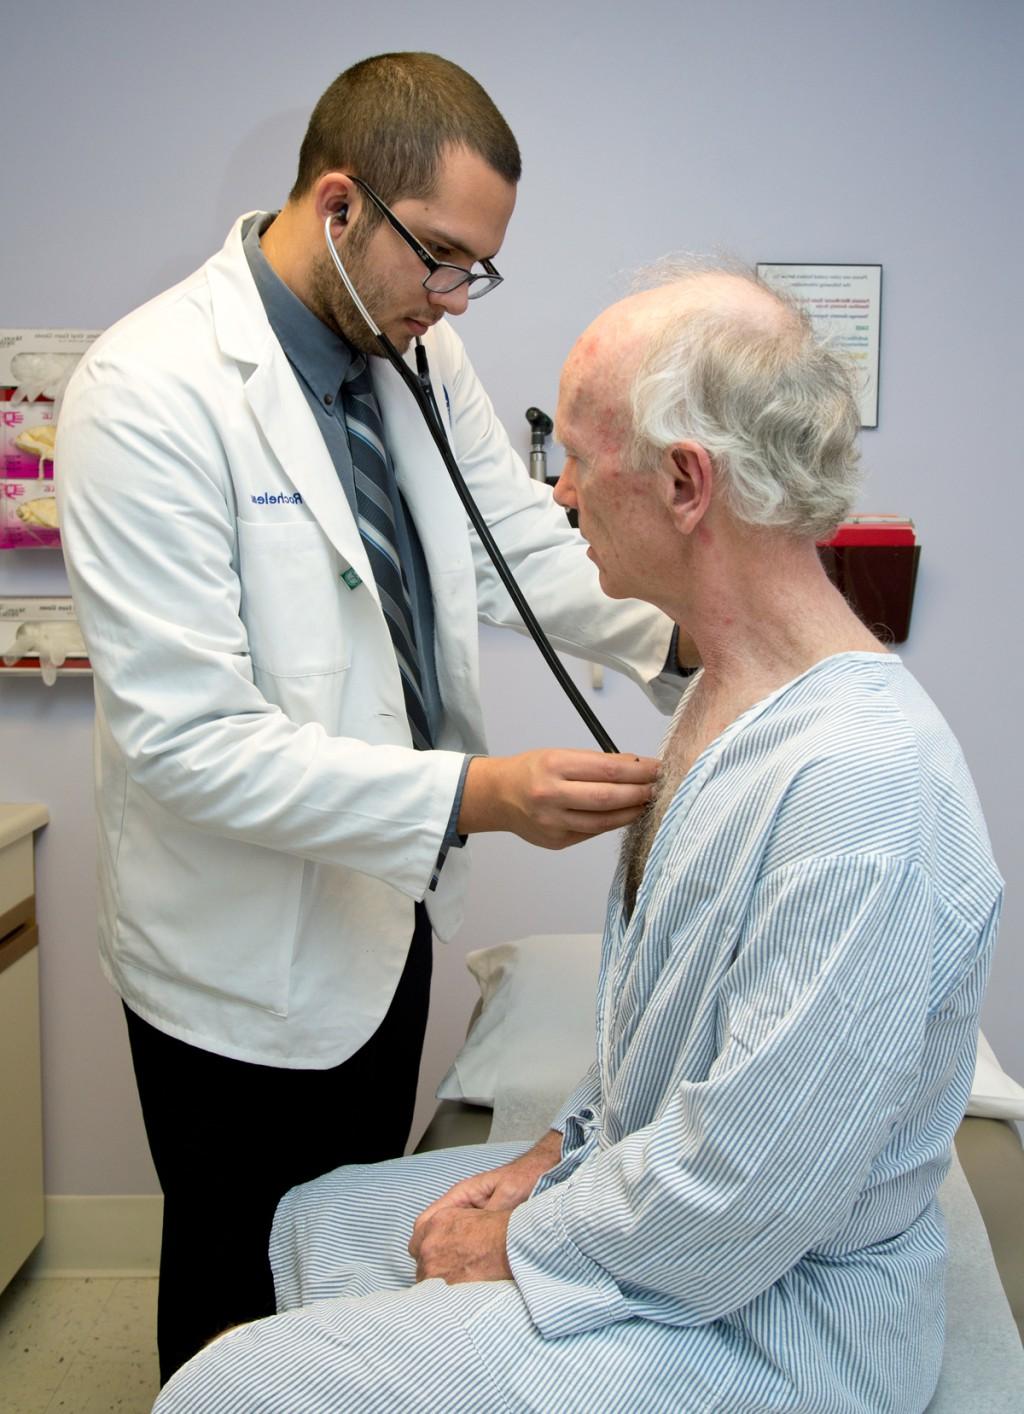 A C O M student uses a stethoscope to listen to an elderly patient's heartbeat and breathing